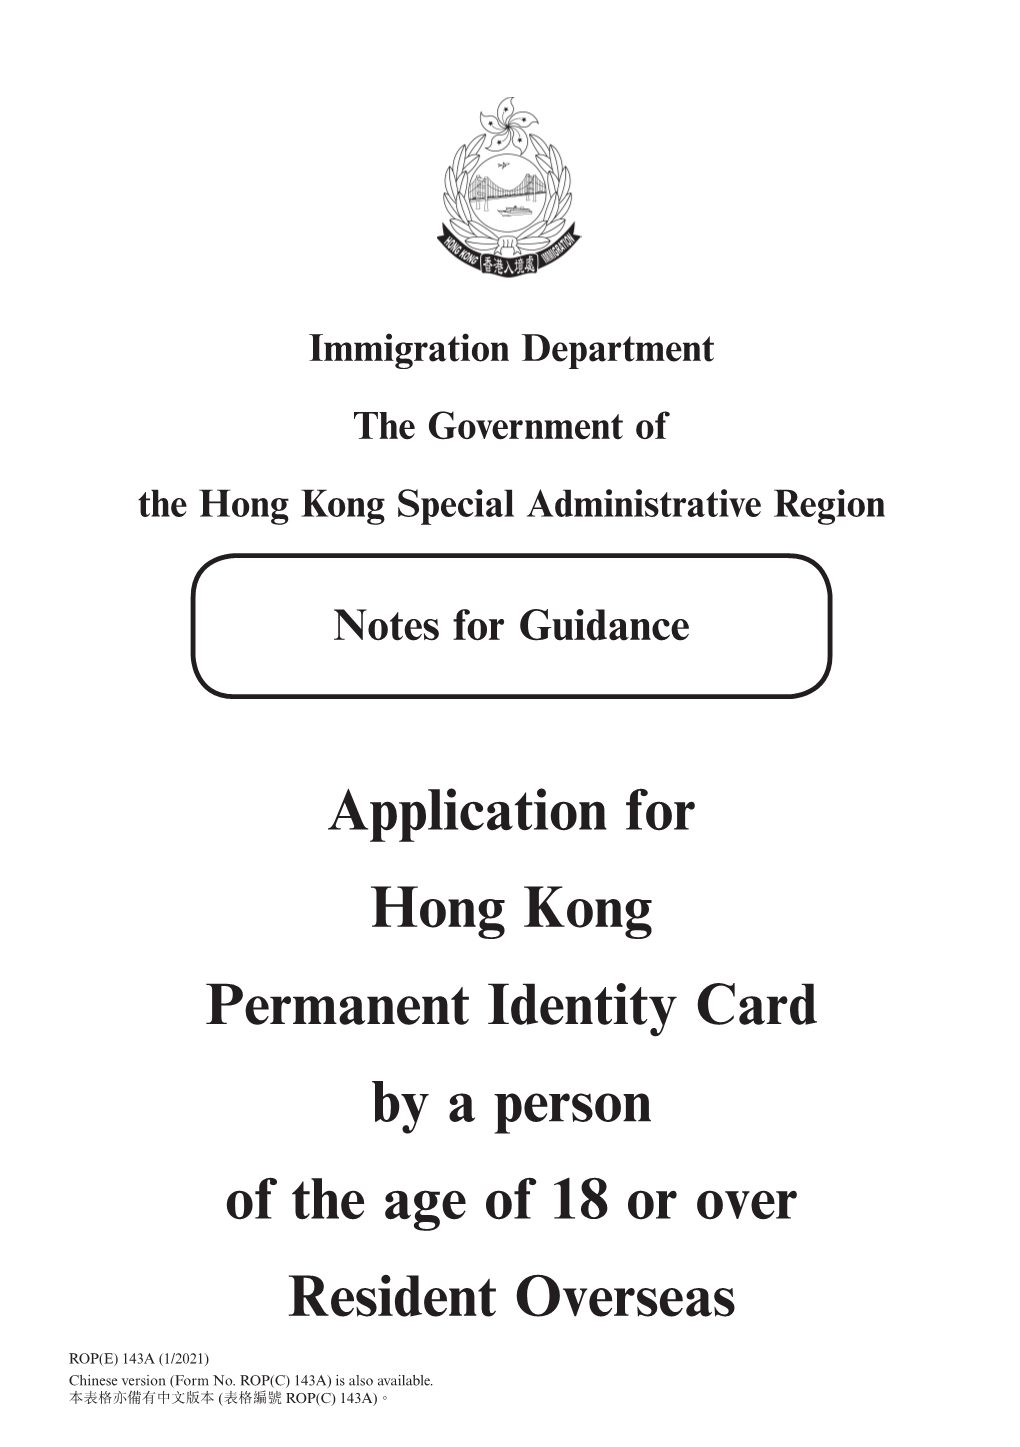 Application for Hong Kong Permanent Identity Card by a Person of the Age of 18 Or Over Resident Overseas